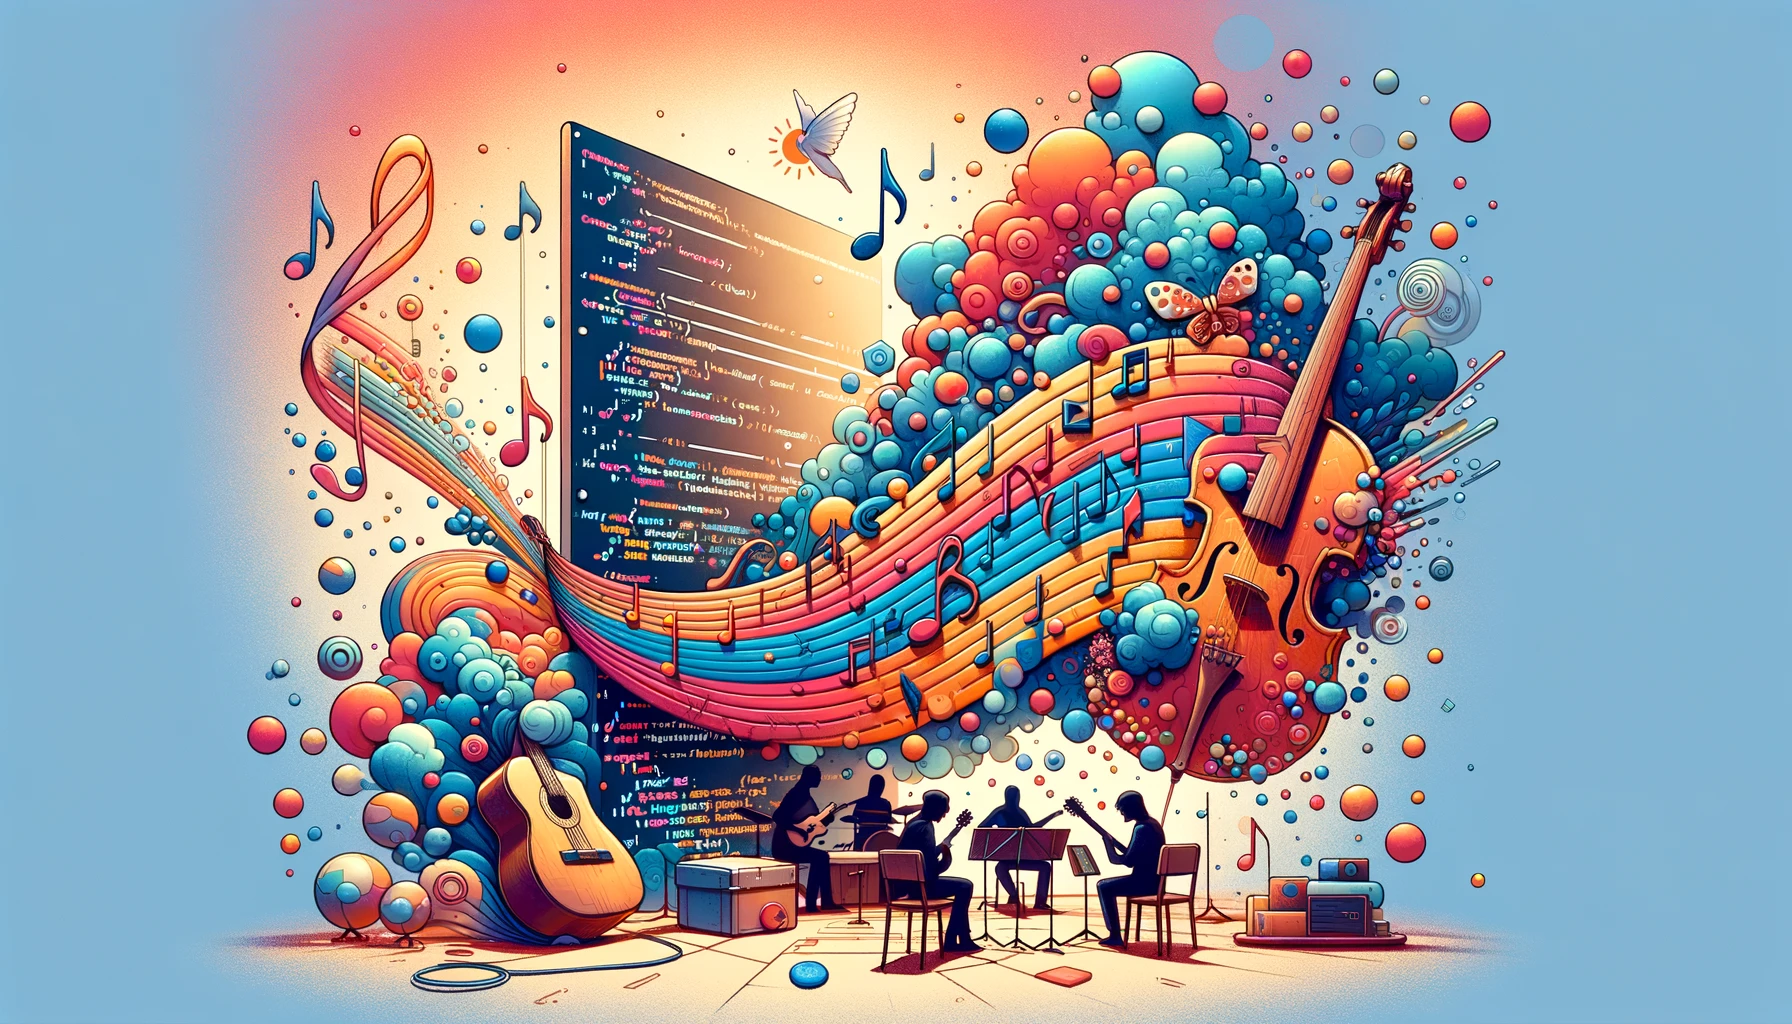 A dynamic illustration showing musicians surrounded by a swirl of musical instruments, animated sheet music, and a digital audio interface, symbolizing the blend of traditional music with modern technology.